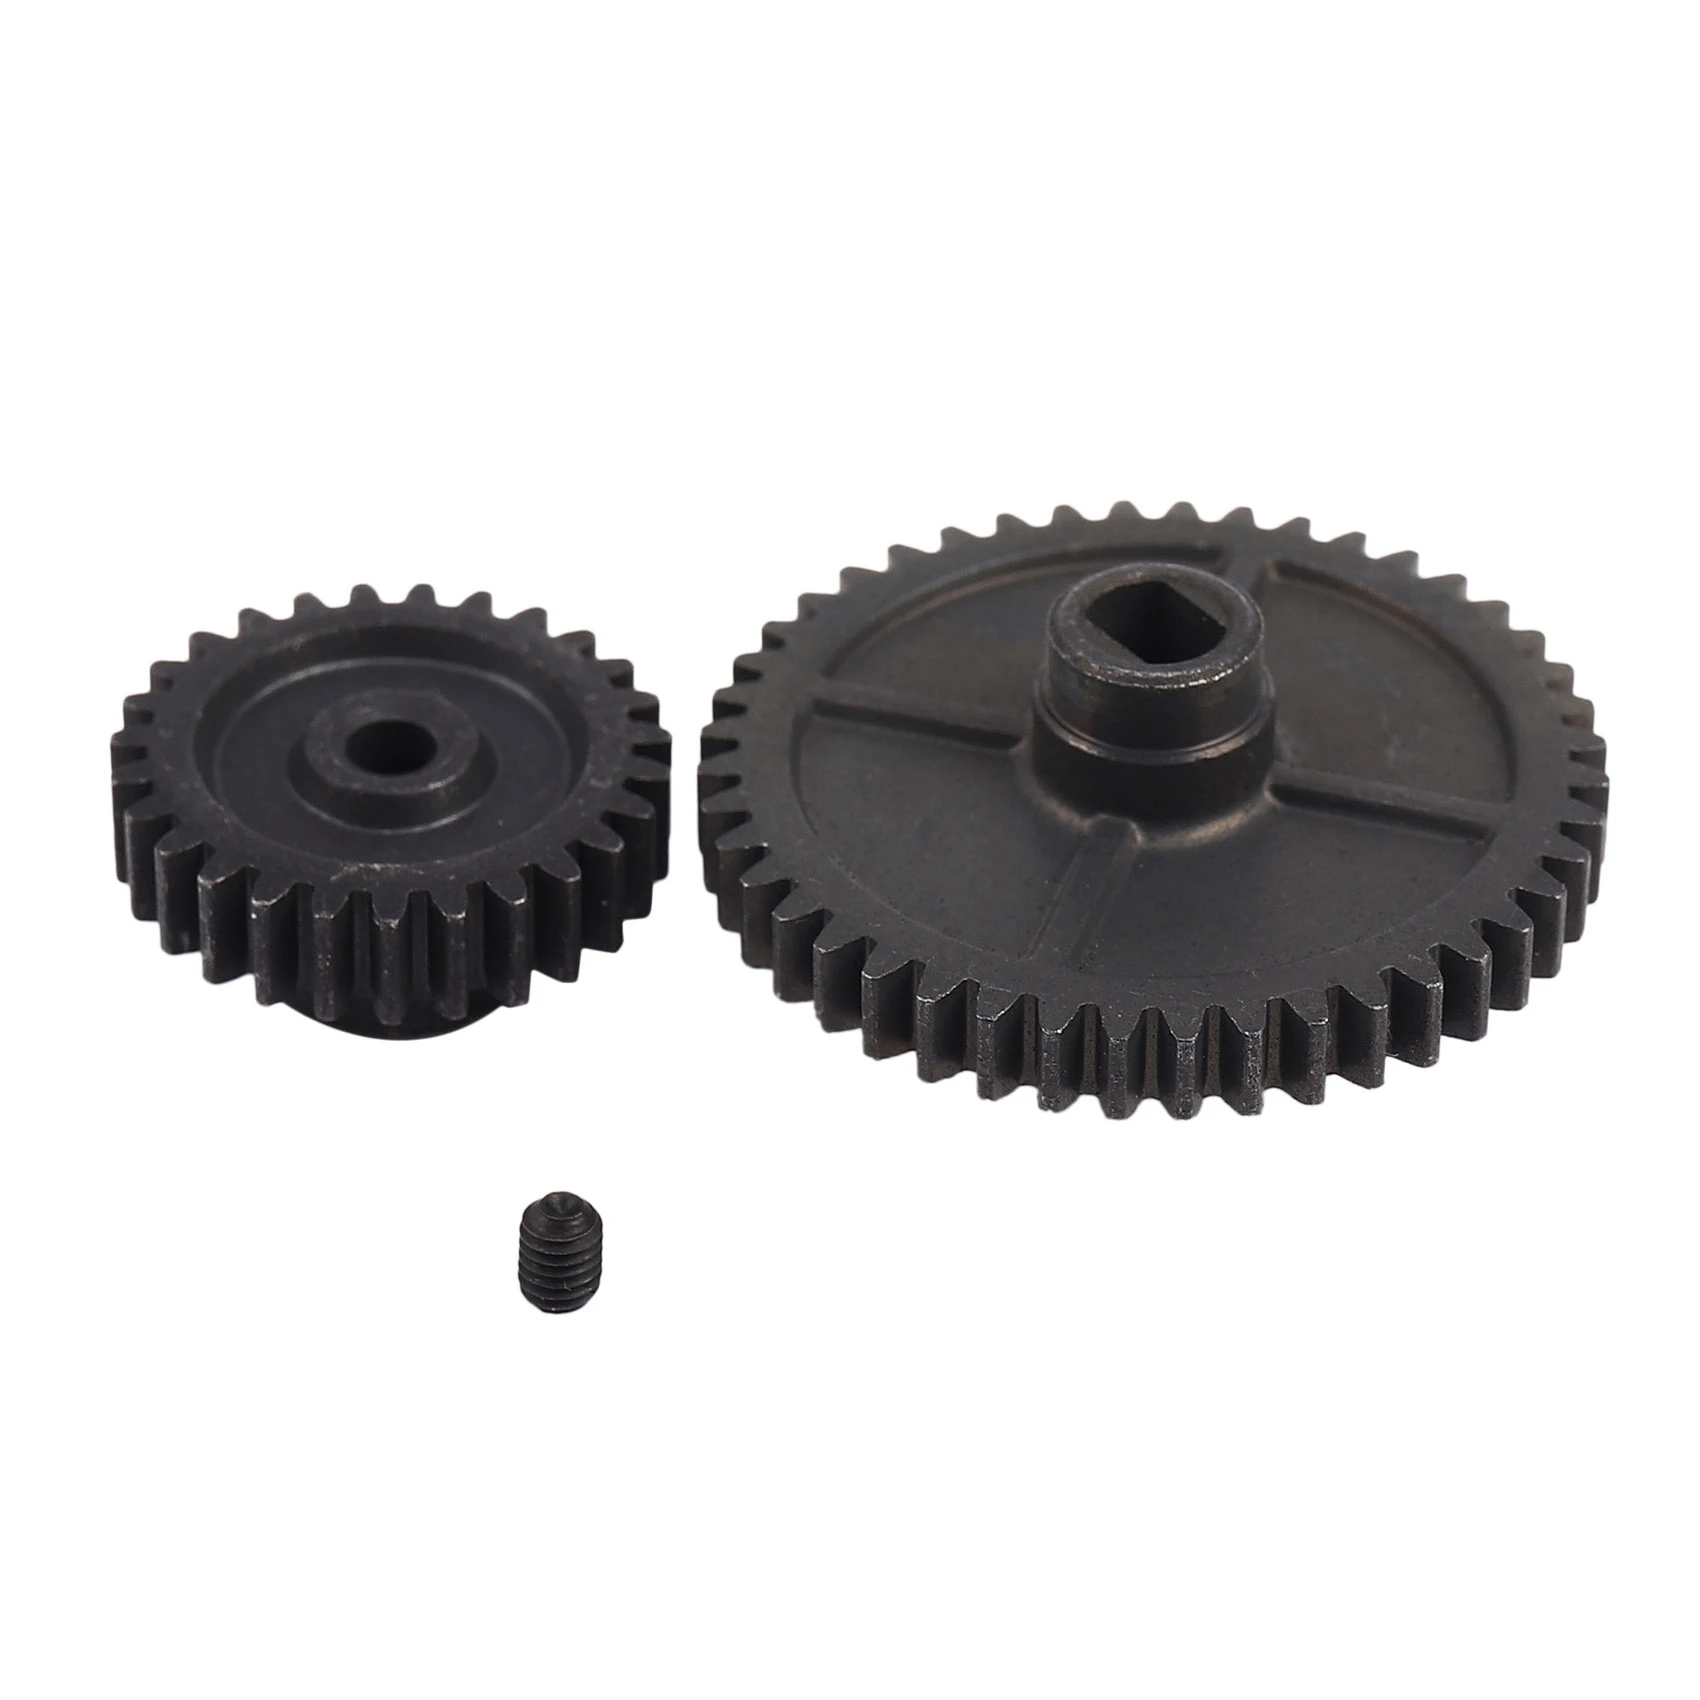 

Wltoys 144001 144002 144010 124007 124016 124017 124018 124019 Steel 44T Reduction Gear and 27T Motor Gear RC Car Upgrades Parts